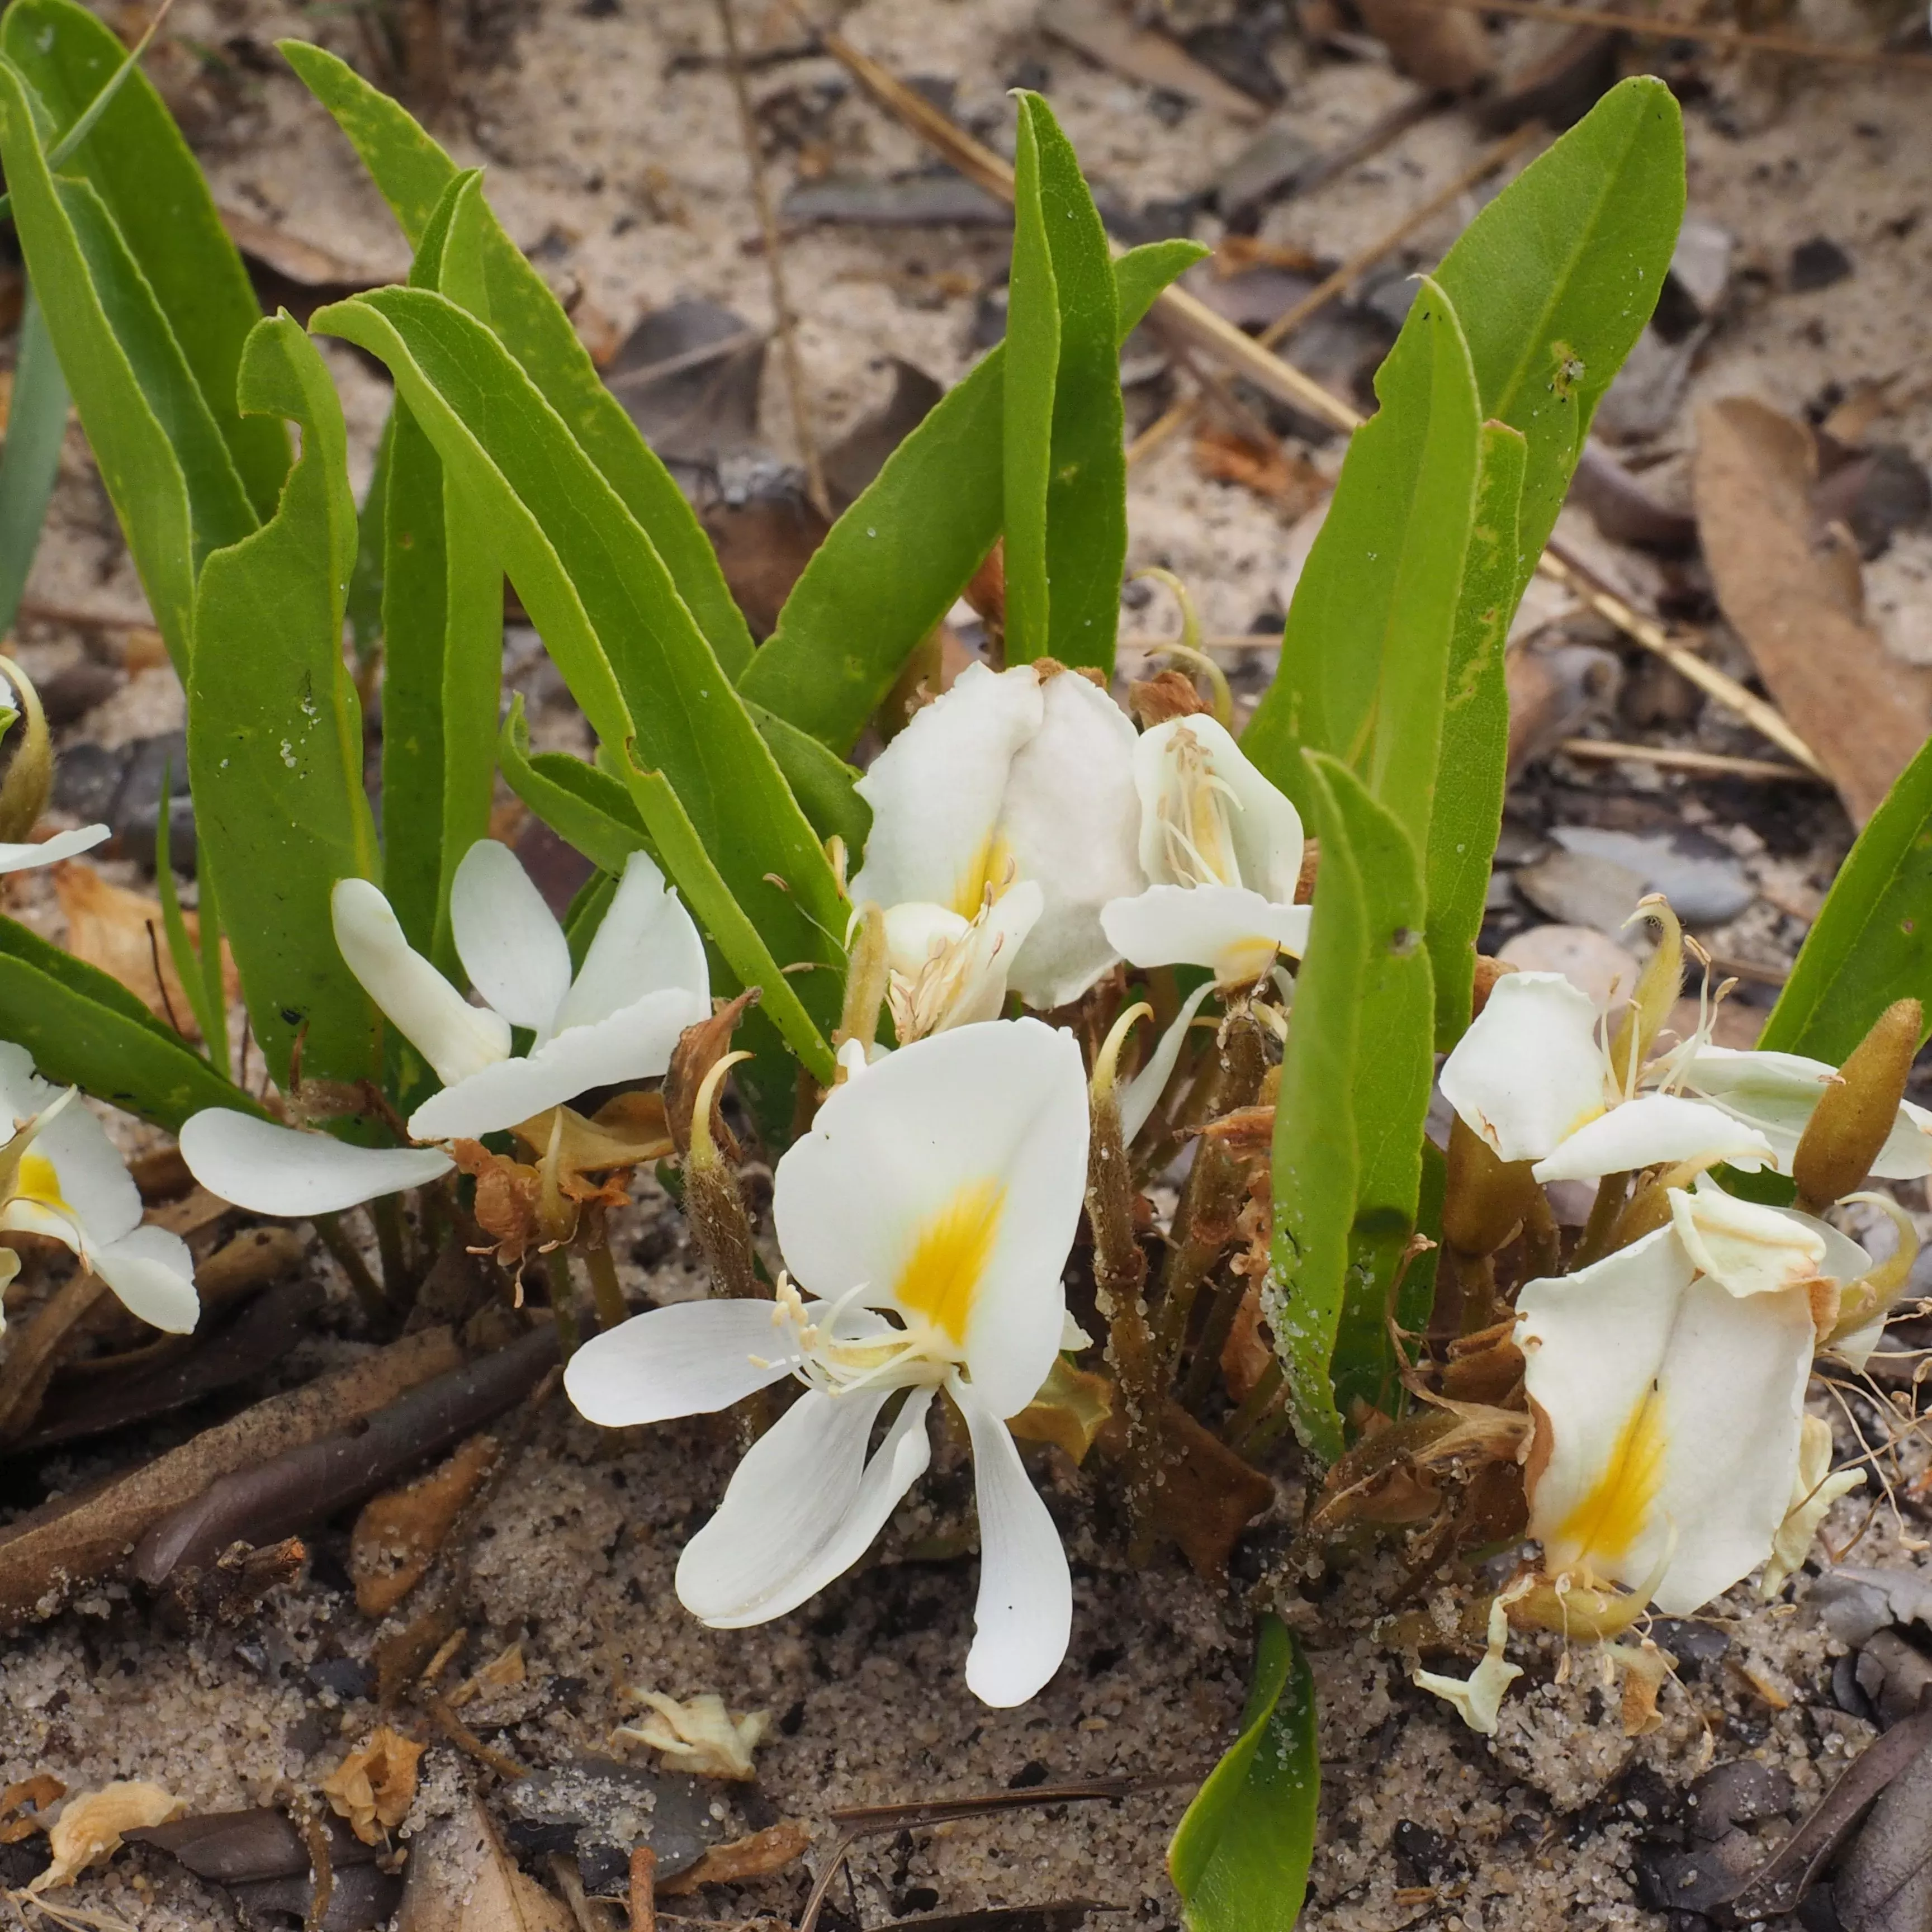 White flowers emerge from a plant at ground level, they are surrounded by leaves that also appear to grow from the ground.